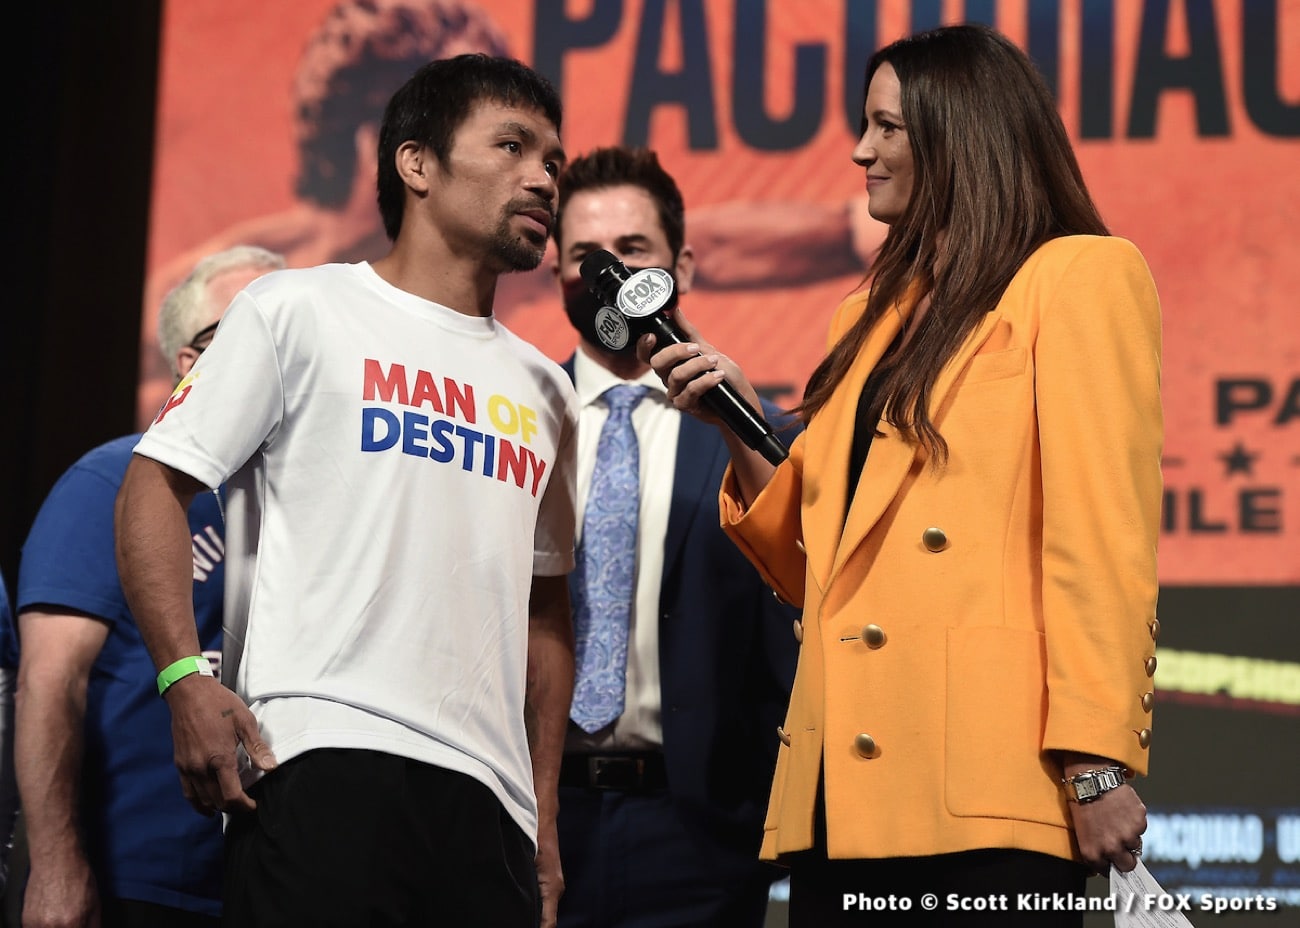 Nedal Hussein Says He “Hated Boxing” After Being “Cheated Out Of A World Title” Due To Hugely Controversial Pacquiao Fight